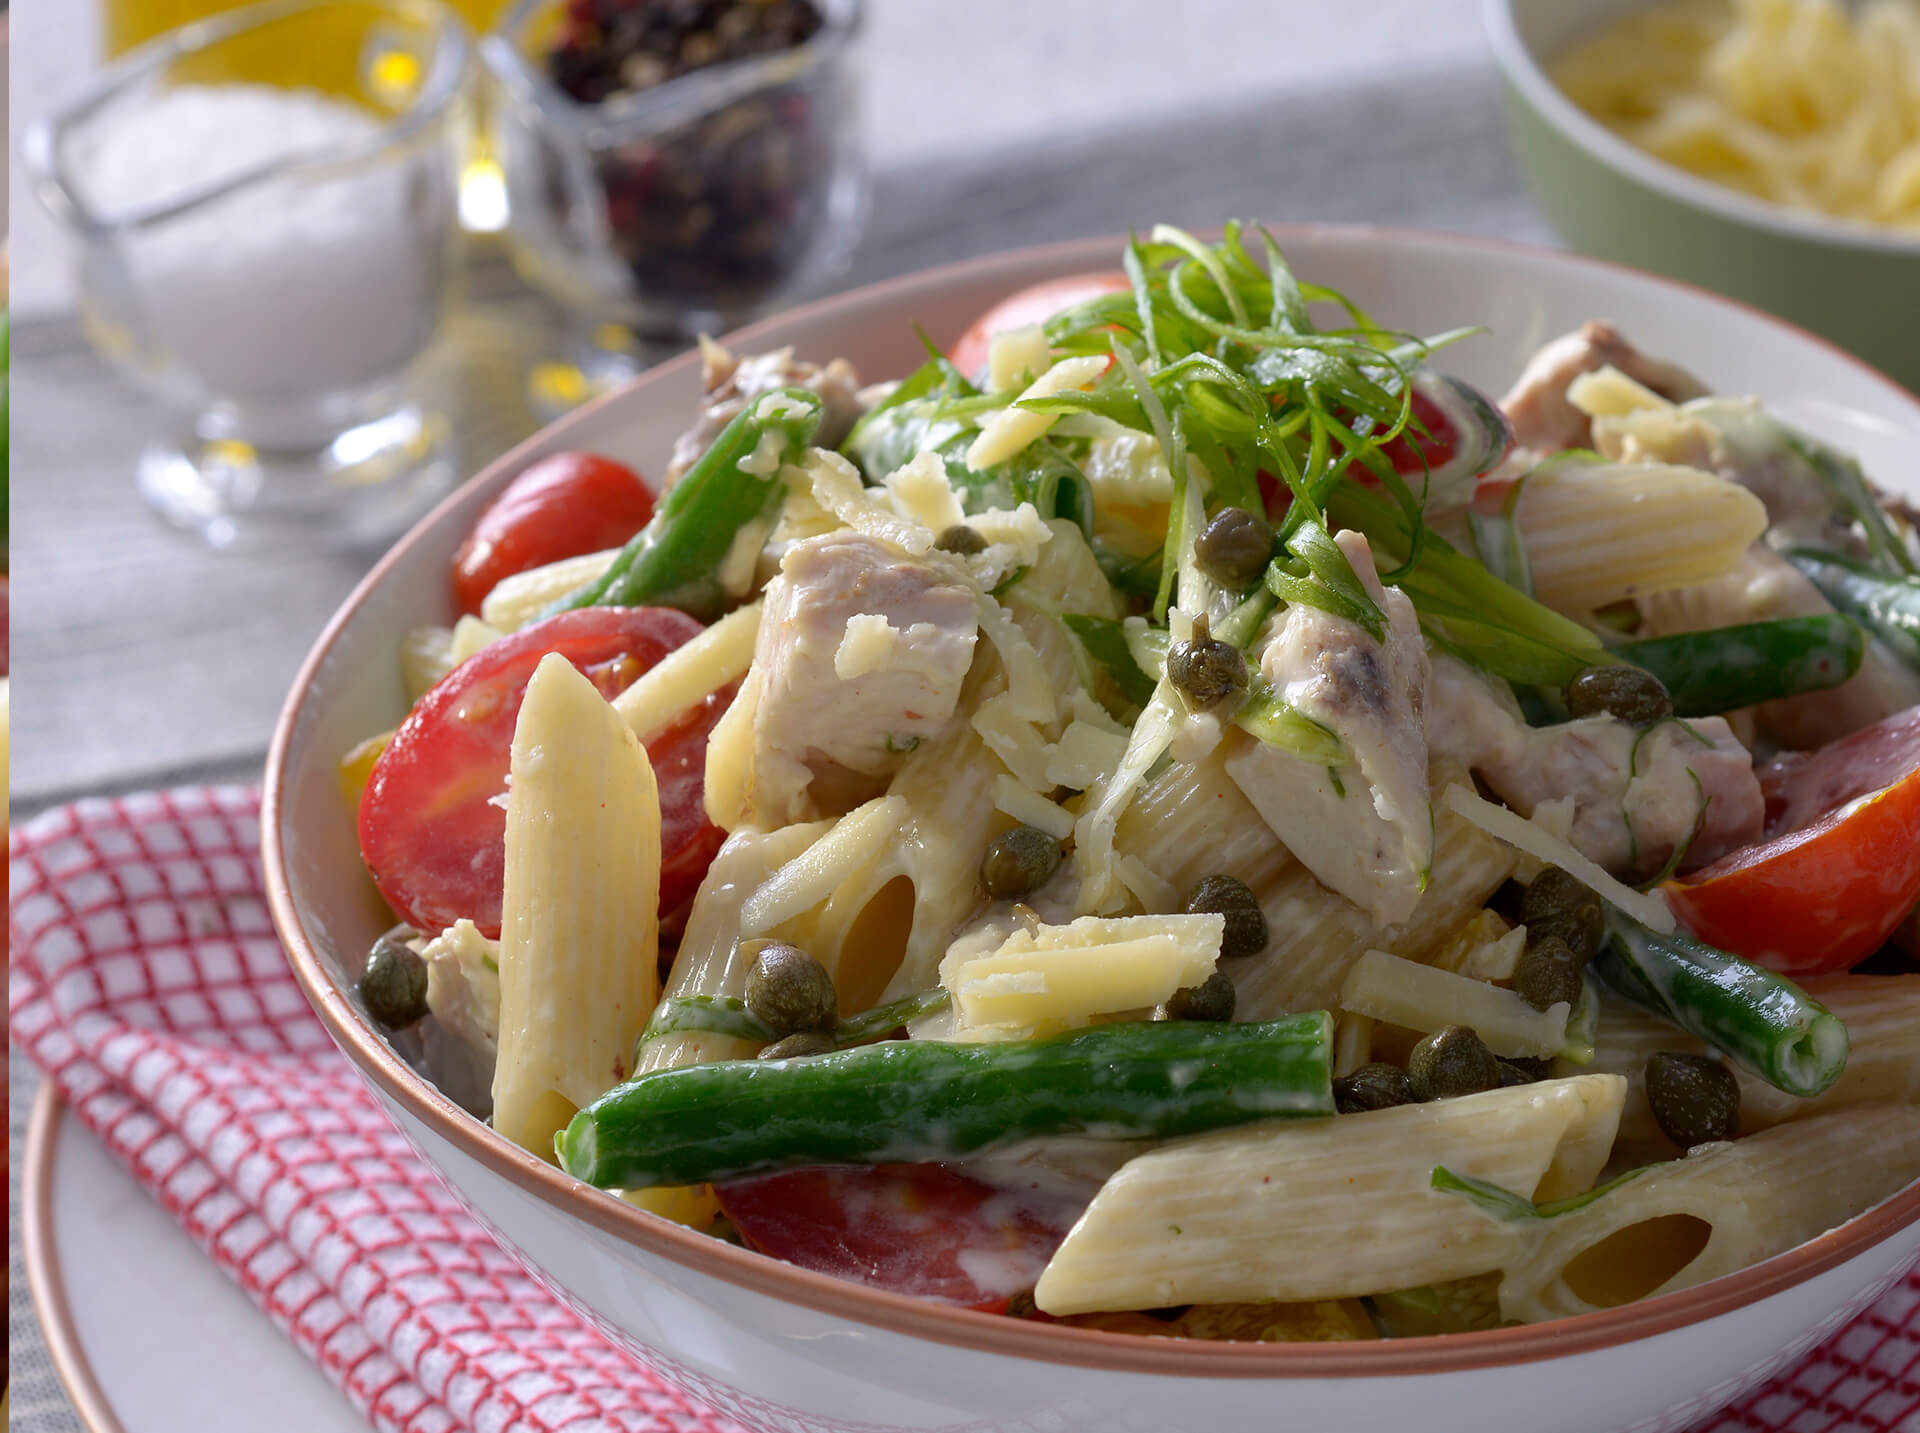 Penne with chicken and green bean salad 1920x1433